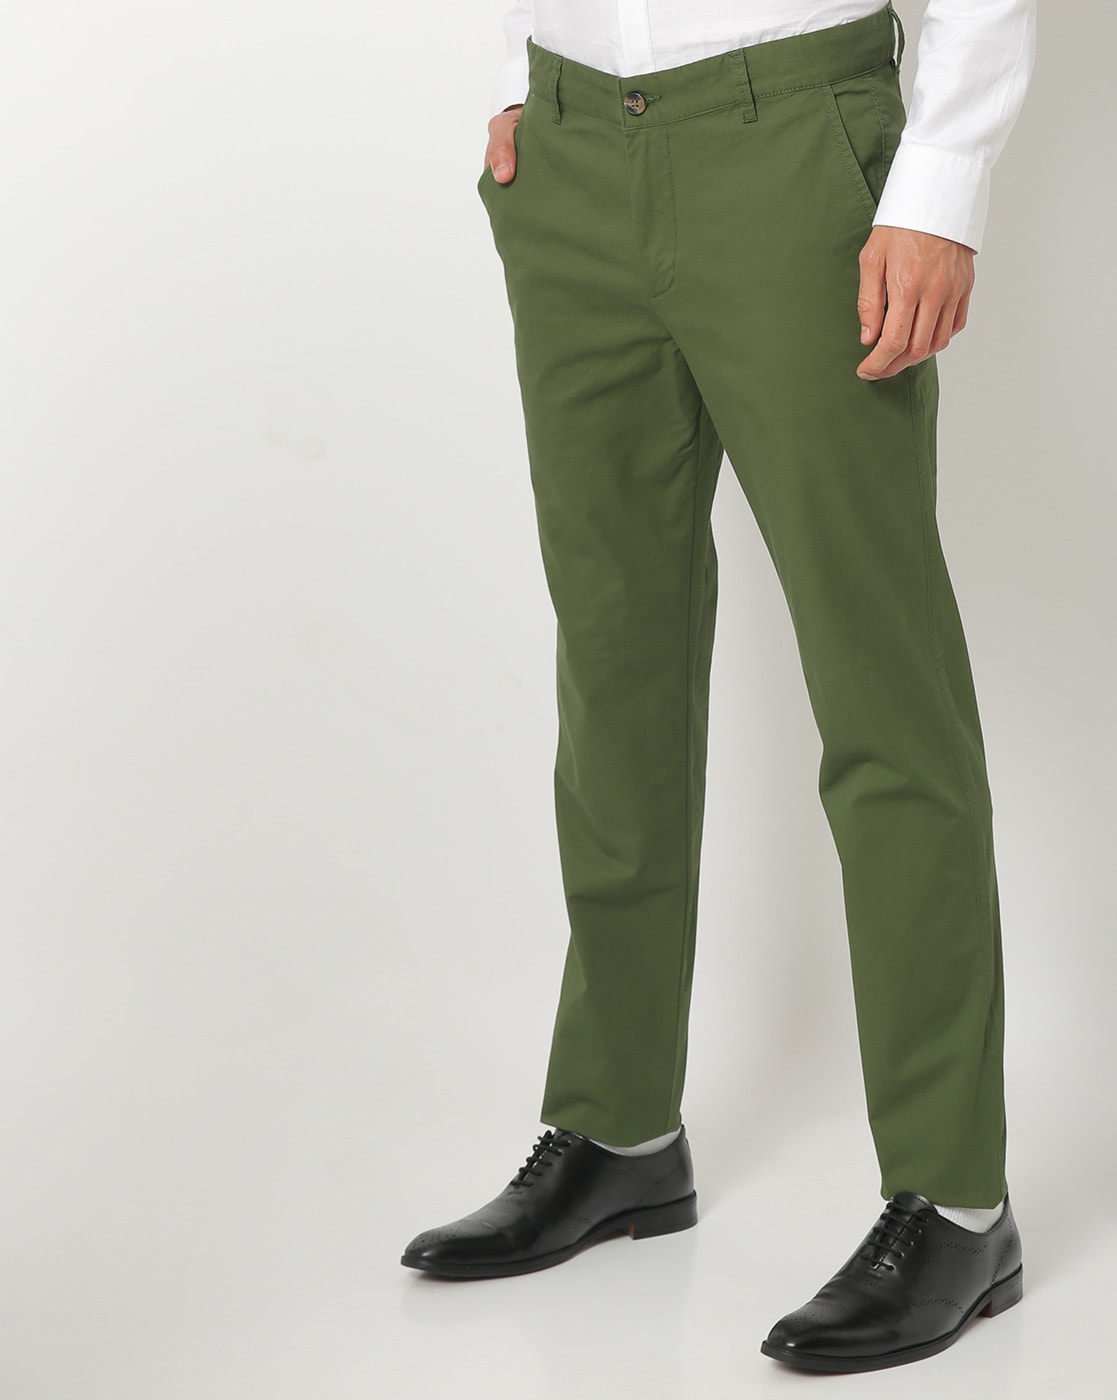 Buy Olive Green Color Ankle Length Fusion Cotton Pant Online | Tistabene -  Tistabene